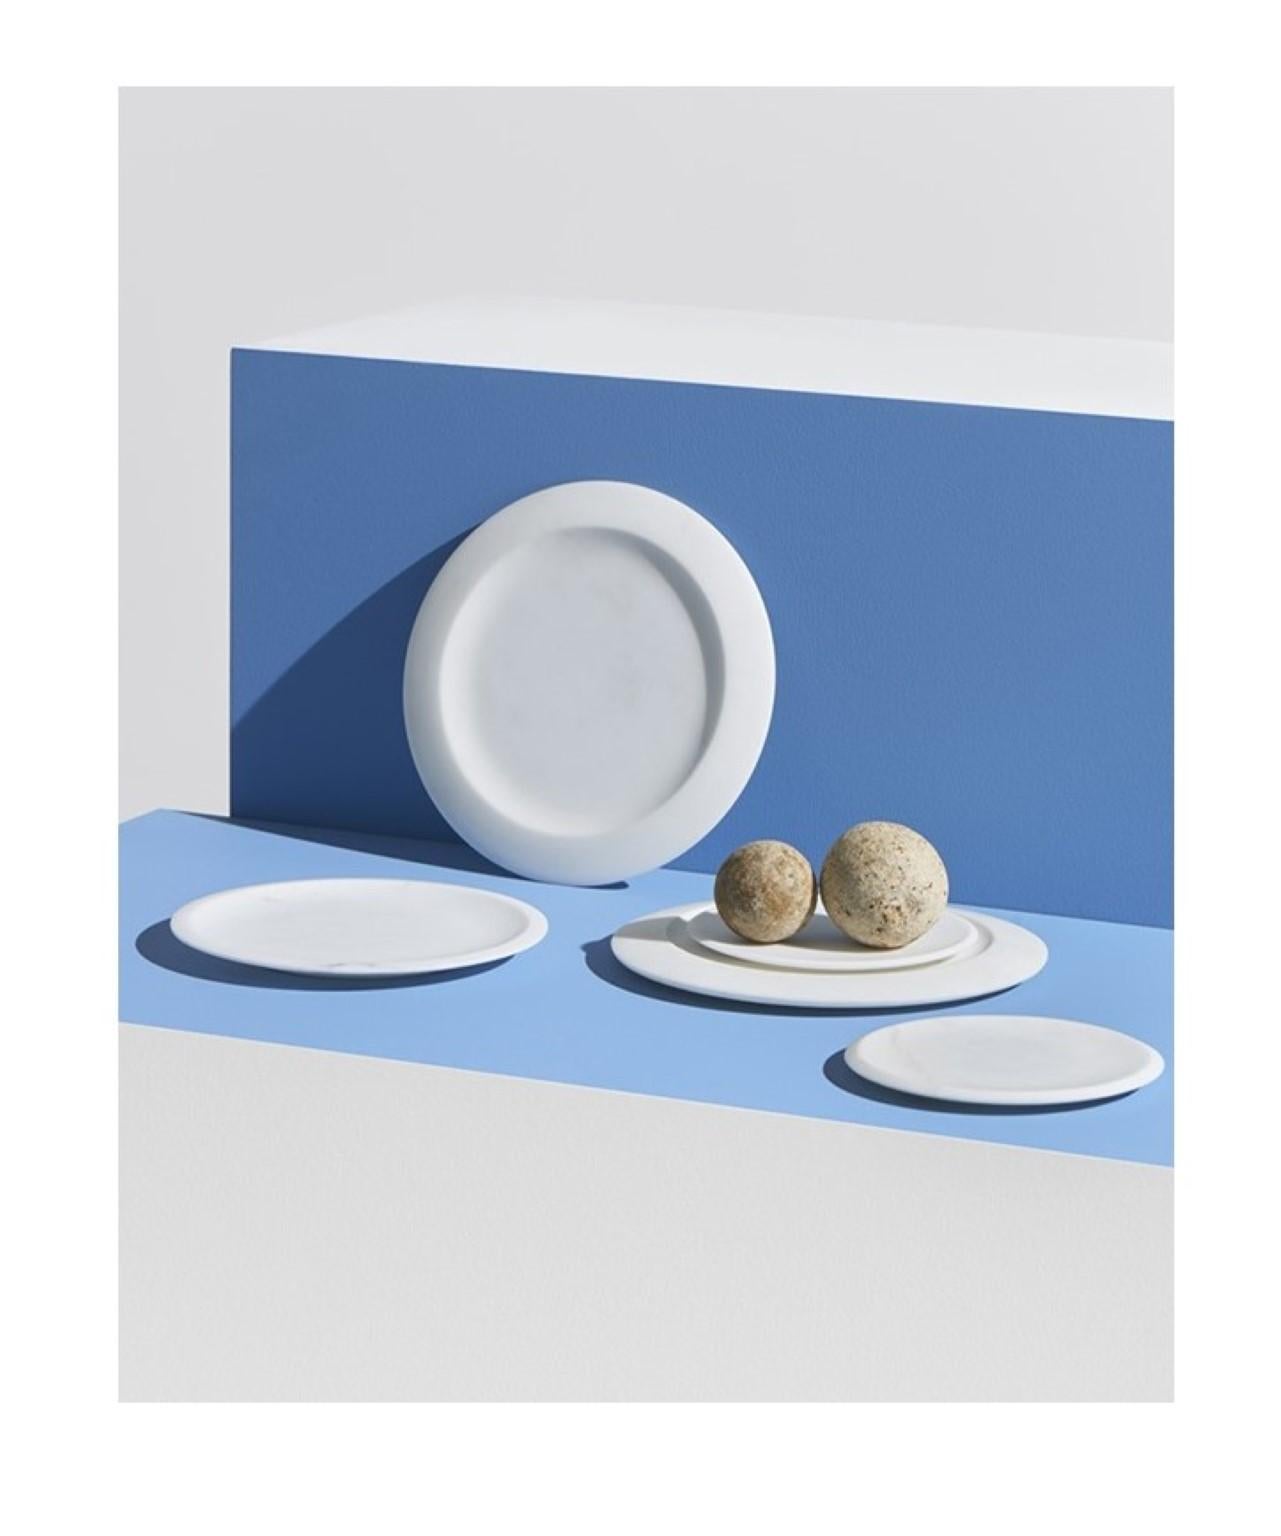 Piatto piano #3 - side plate by Ivan Colominas
Materia e Tavola Collection
Dimensions: 19 x 1.2 cm
Materials: Bianco Michelangelo
Also available: Bianco Carrara.

The collection is a tribute to one of Italy’s great masters of design and